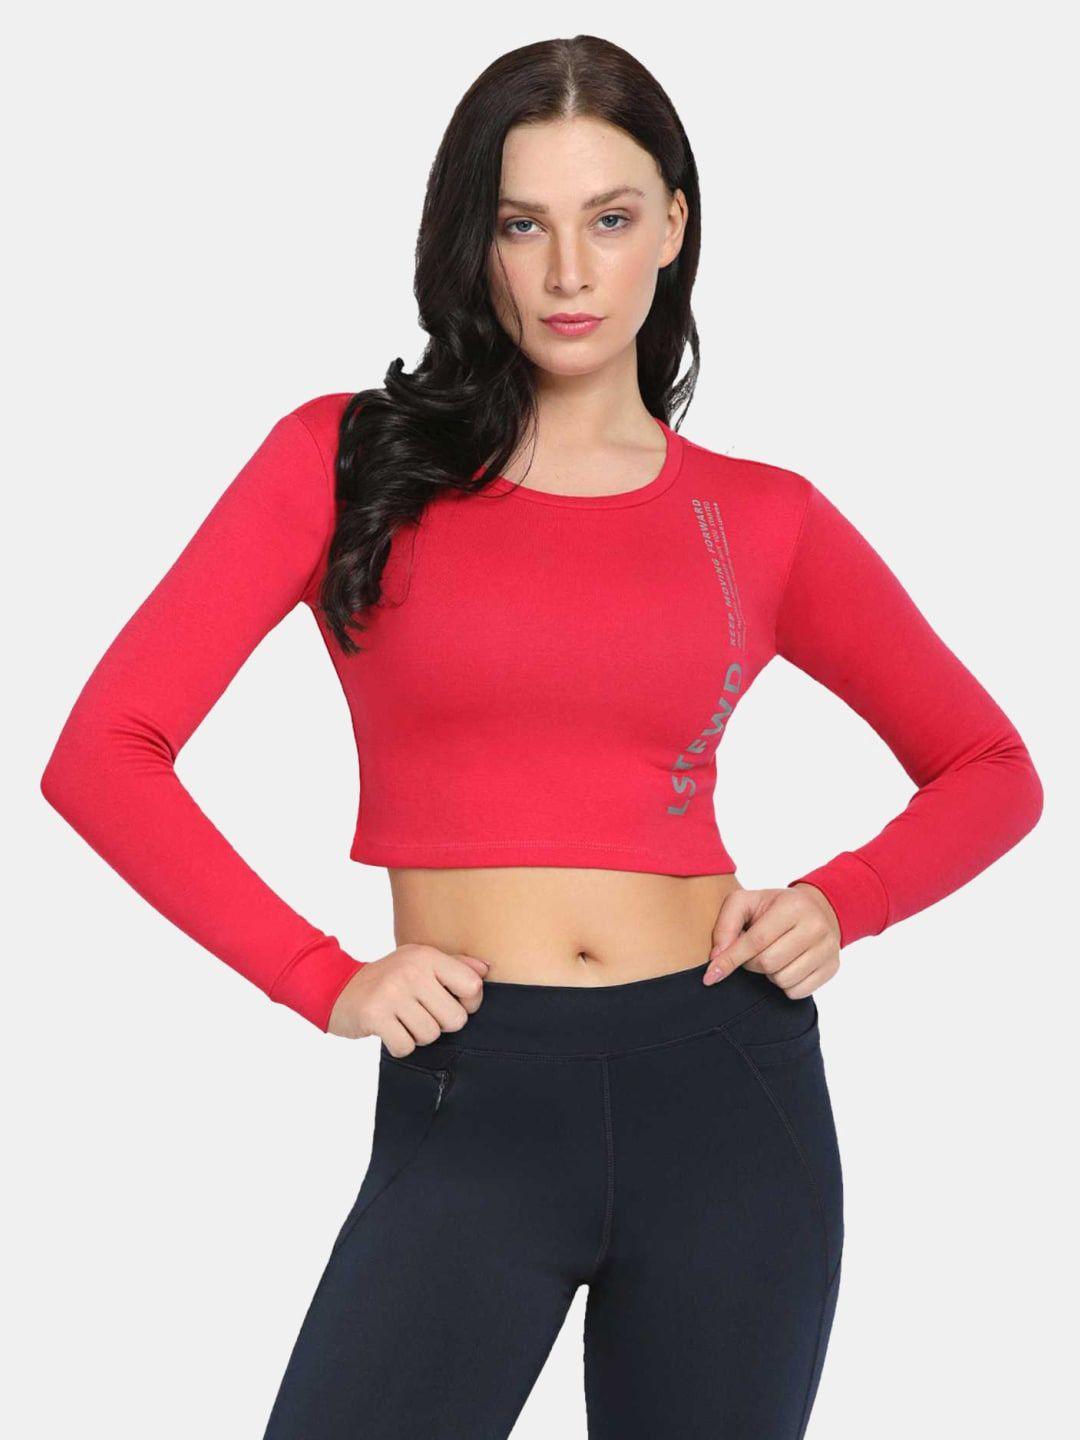 lovable sport typography printed round neck long sleeves fitted crop top